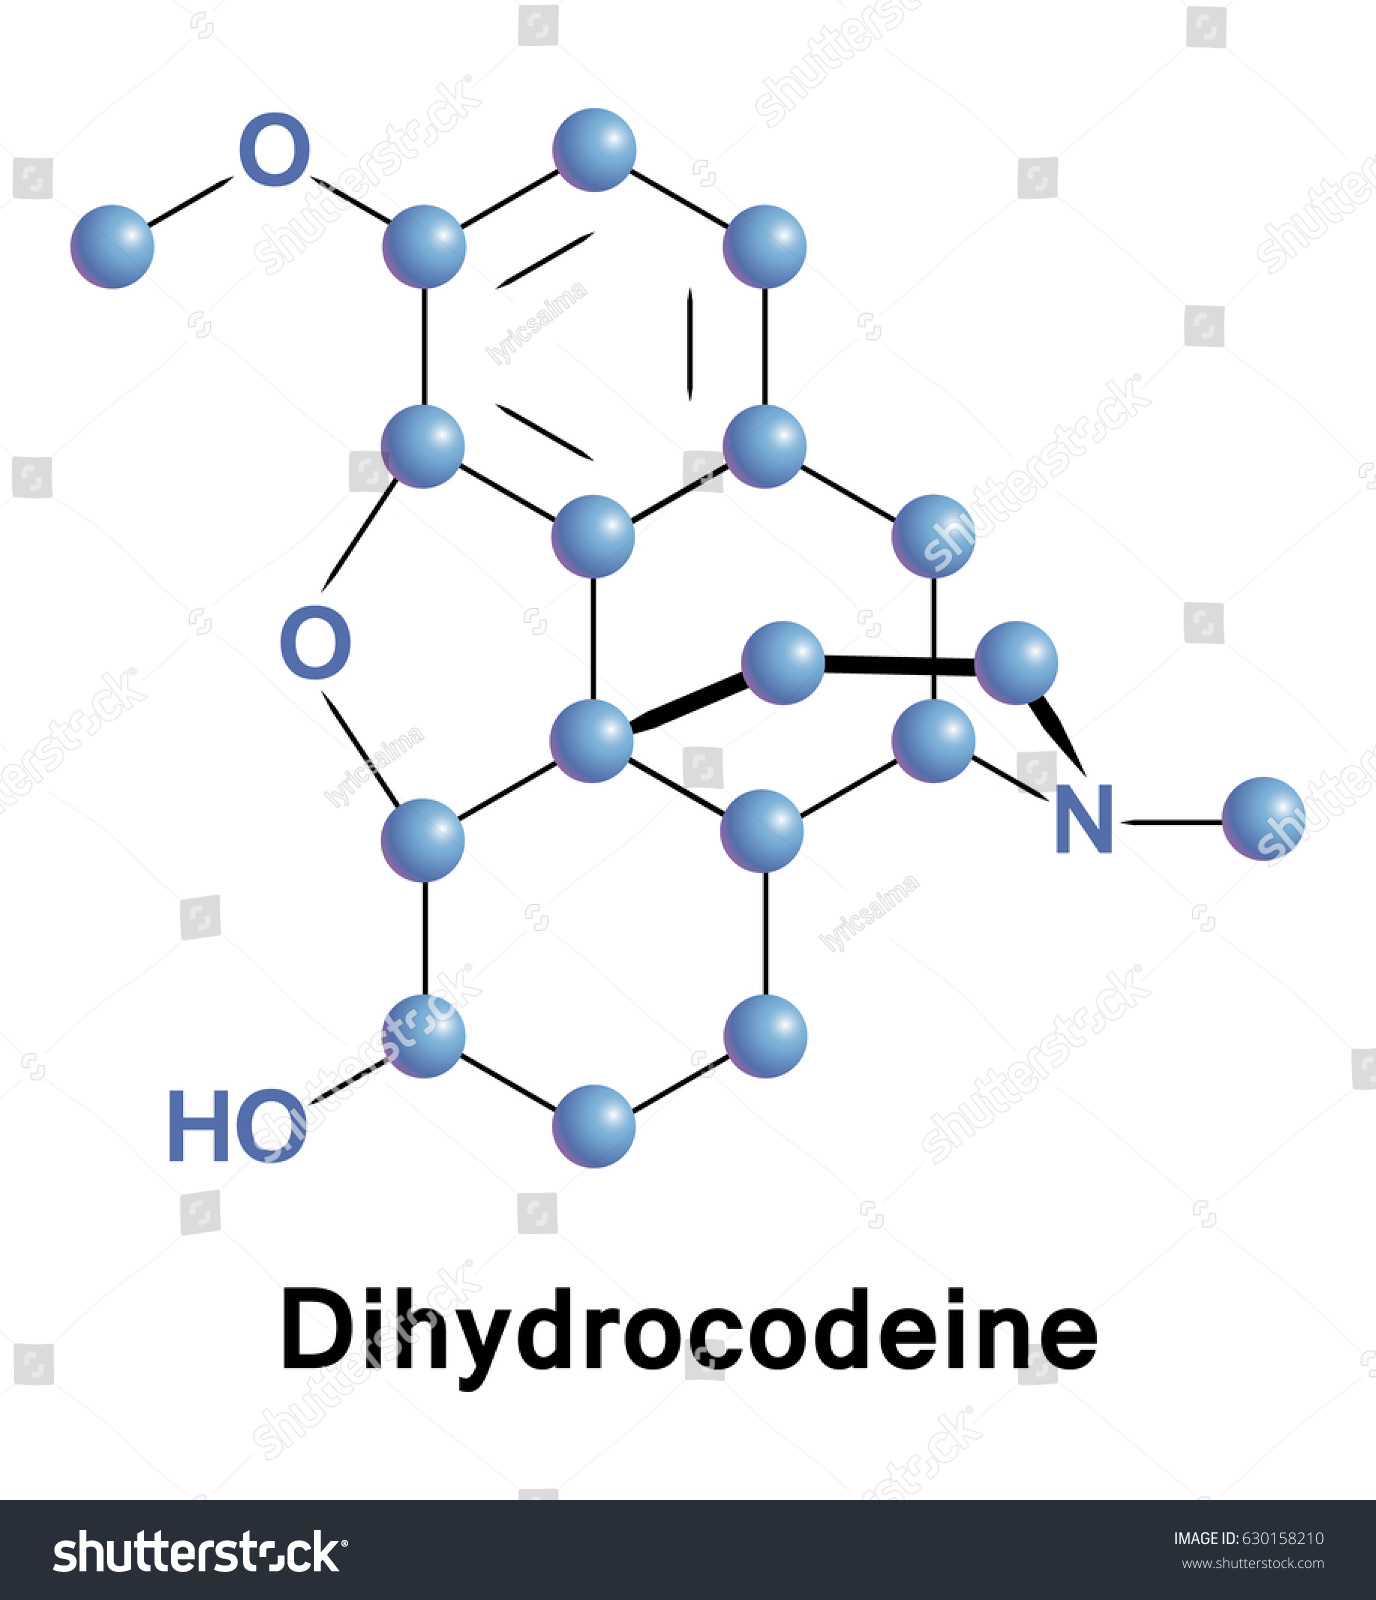 SVG of Dihydrocodeine is a semi-synthetic opioid analgesic prescribed for pain or severe dyspnea, or as an antitussive, either alone or compounded with paracetamol or aspirin svg